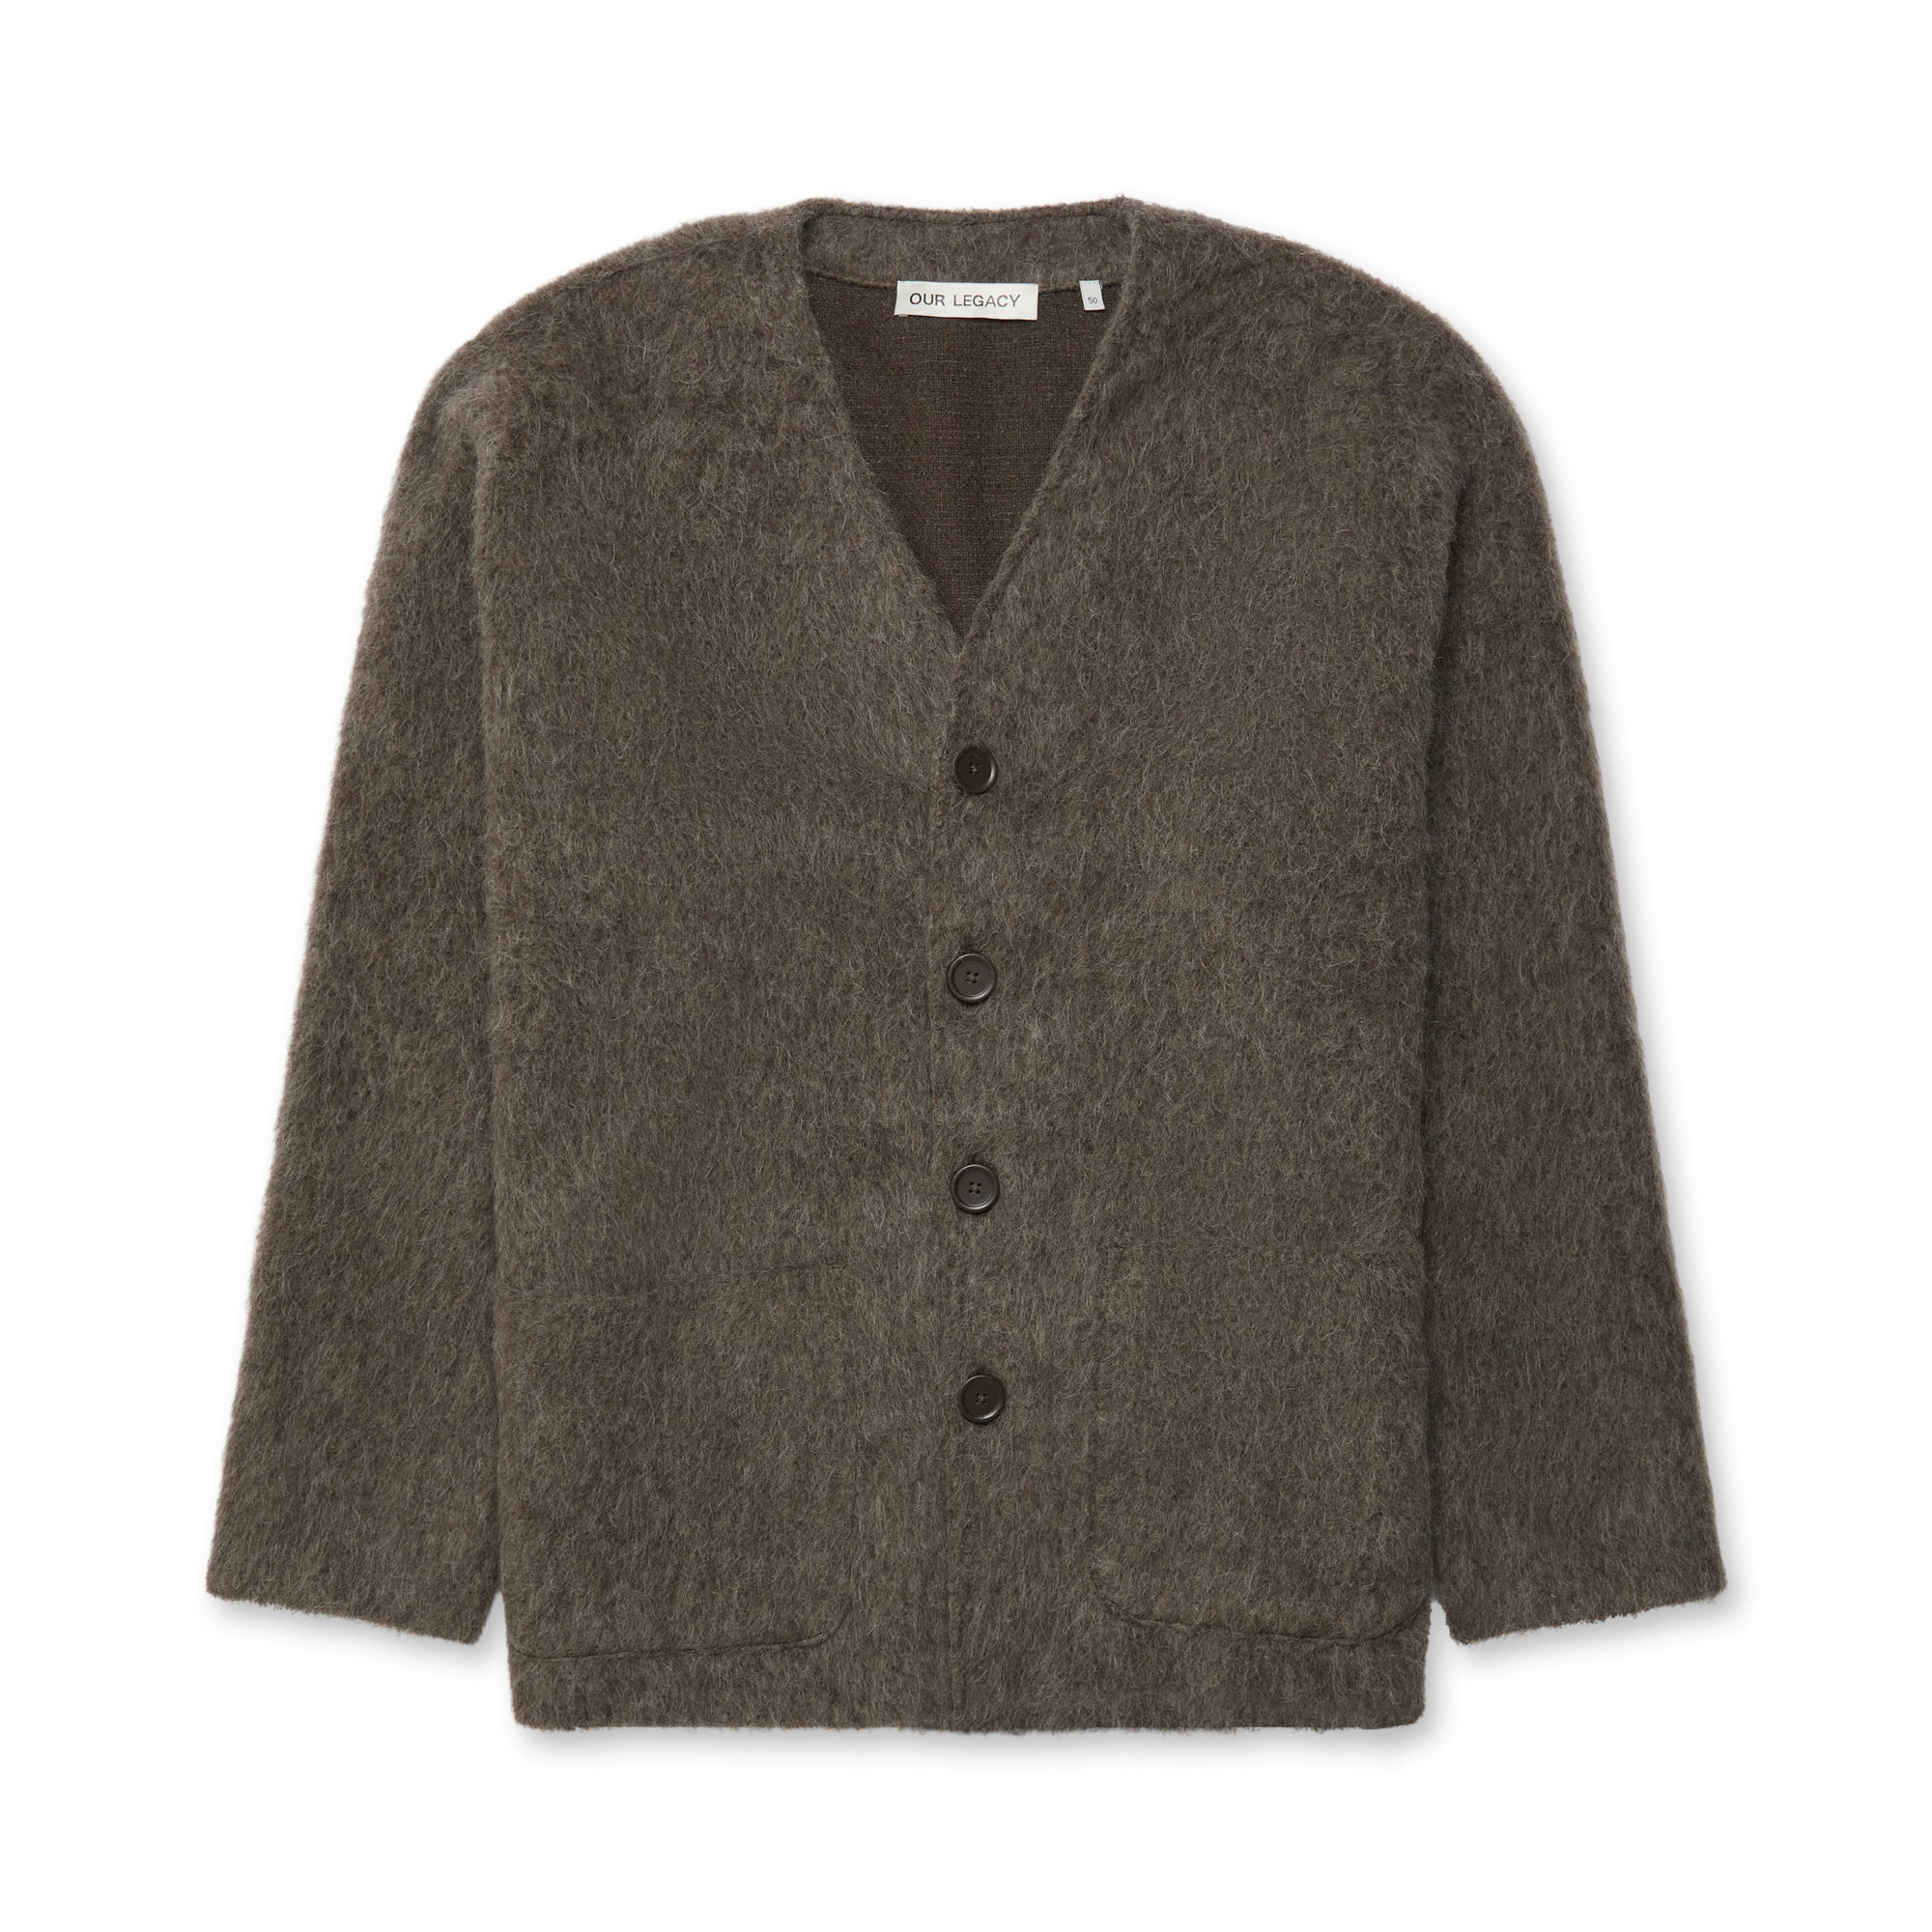 Our Legacy - Men’s Cardigan - (Grey) view 1